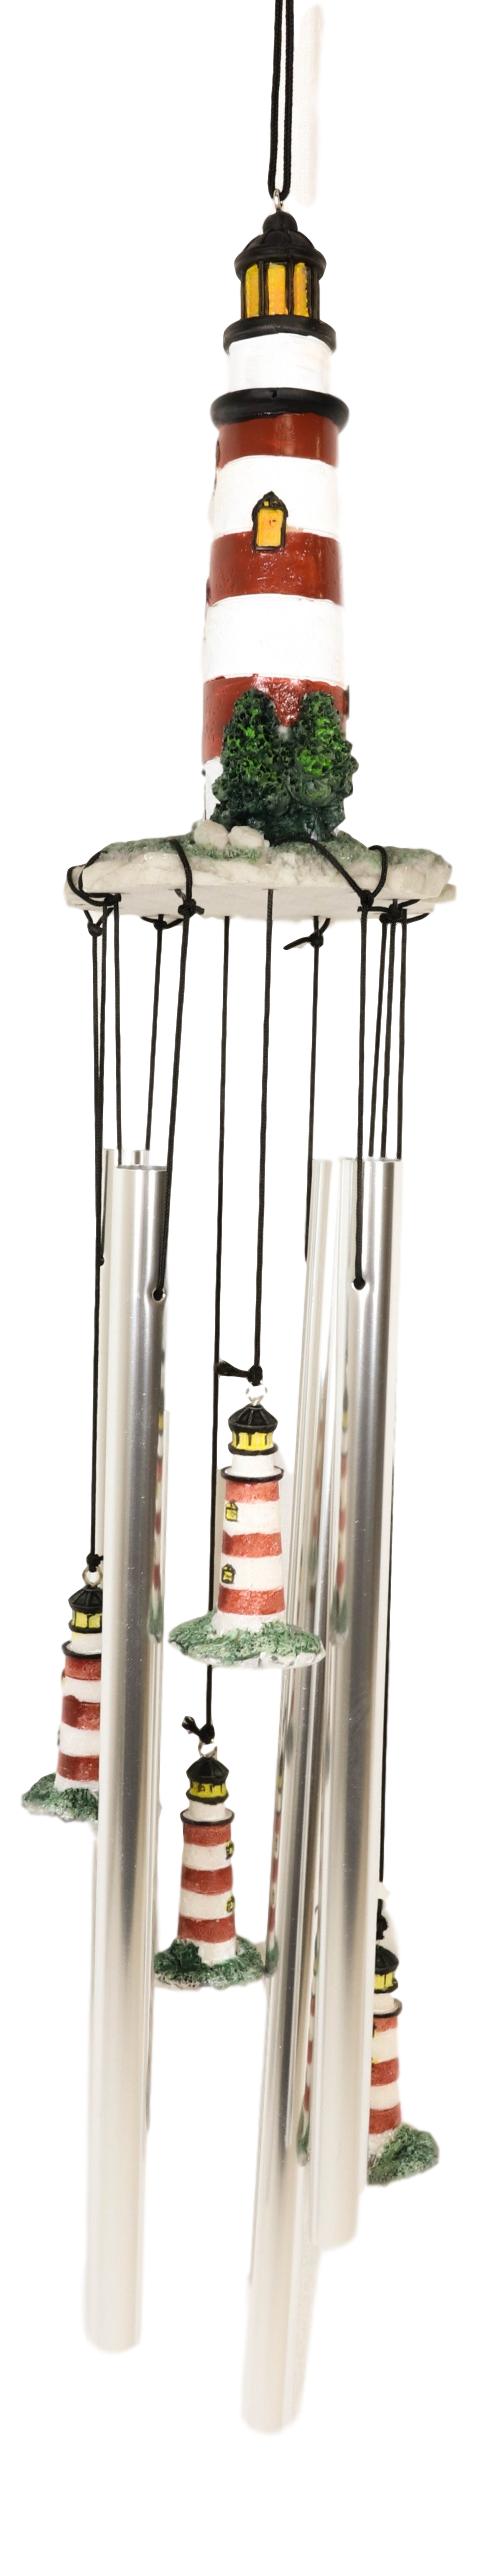 Assateague Islands Lighthouse Nautical Beacon Resonant Relaxing Wind Chime Patio